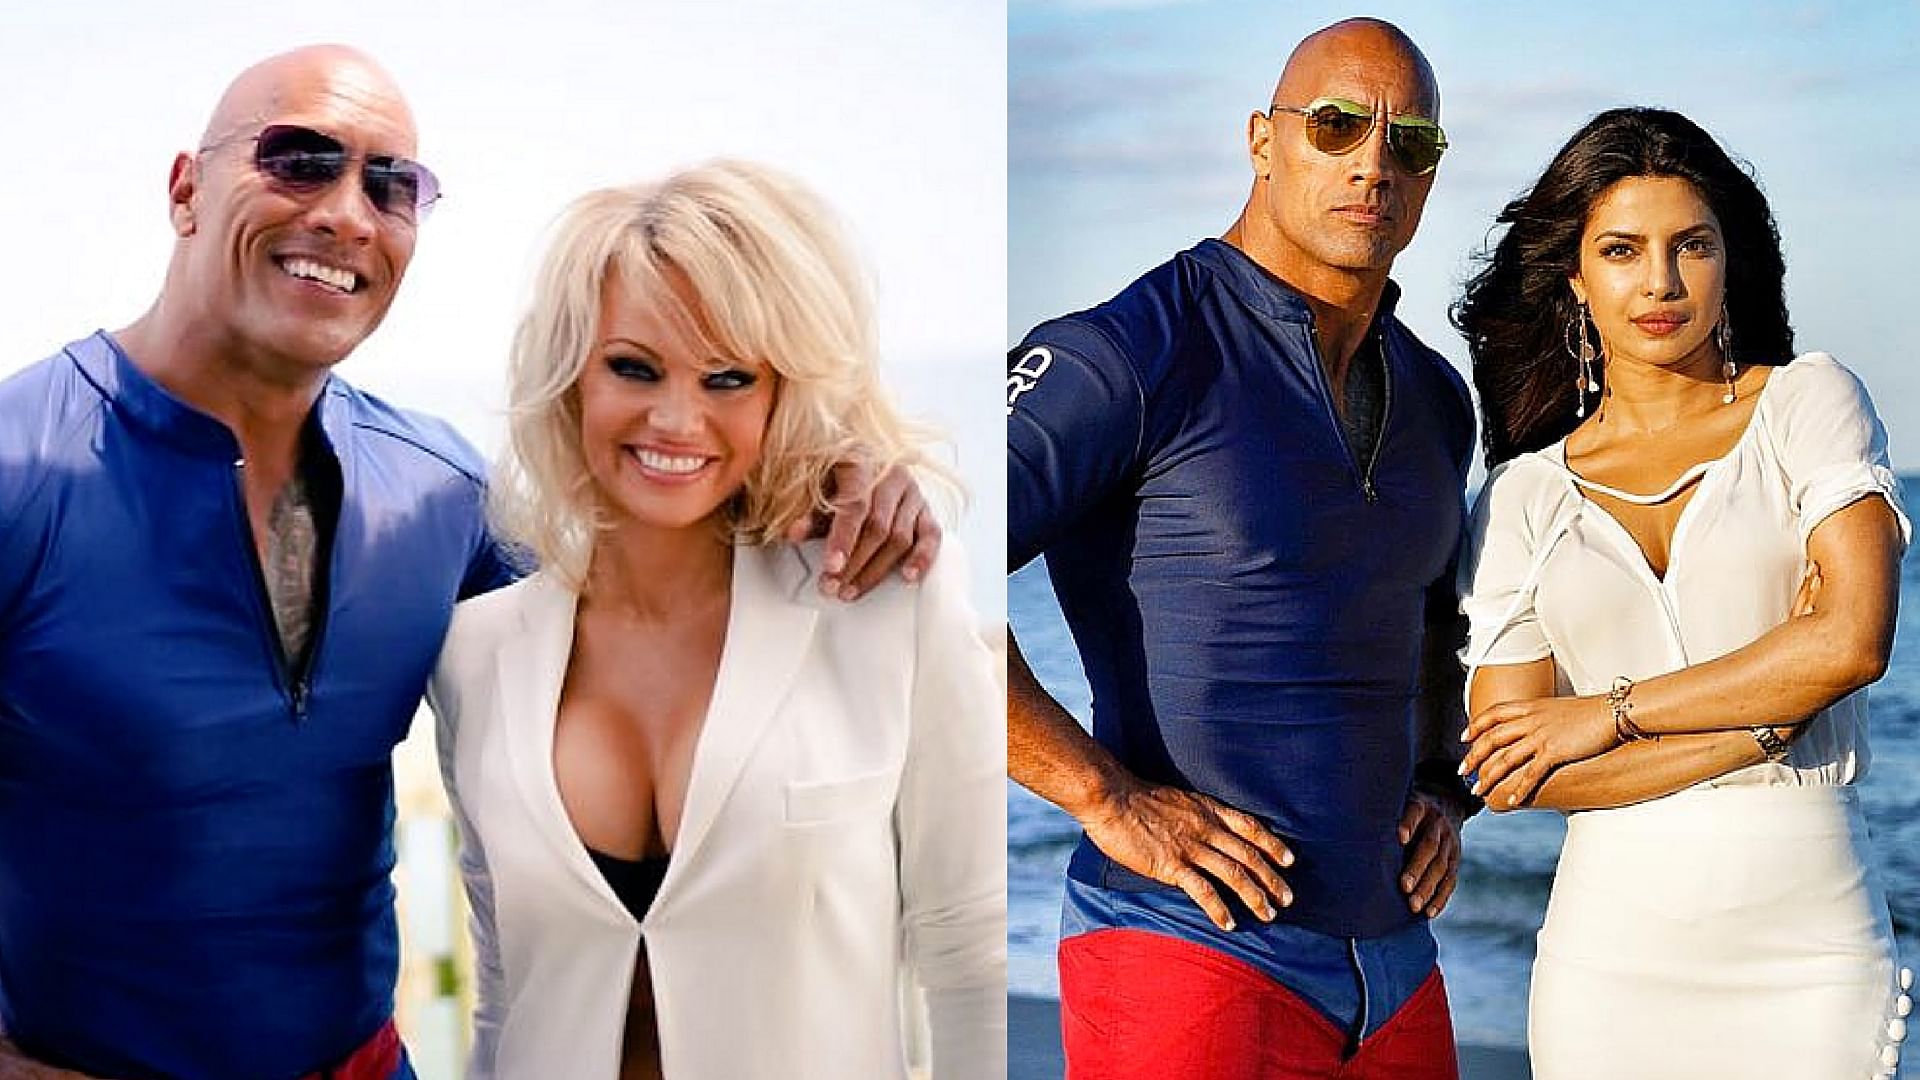 Dwayane Johnson poses with his two favourite Baywatch ladies Pamela Anderson and Priyanka Chopra (Photo courtesy: <a href="https://www.instagram.com/p/BEfKhawIhzb/">Instagram/@therock</a>)